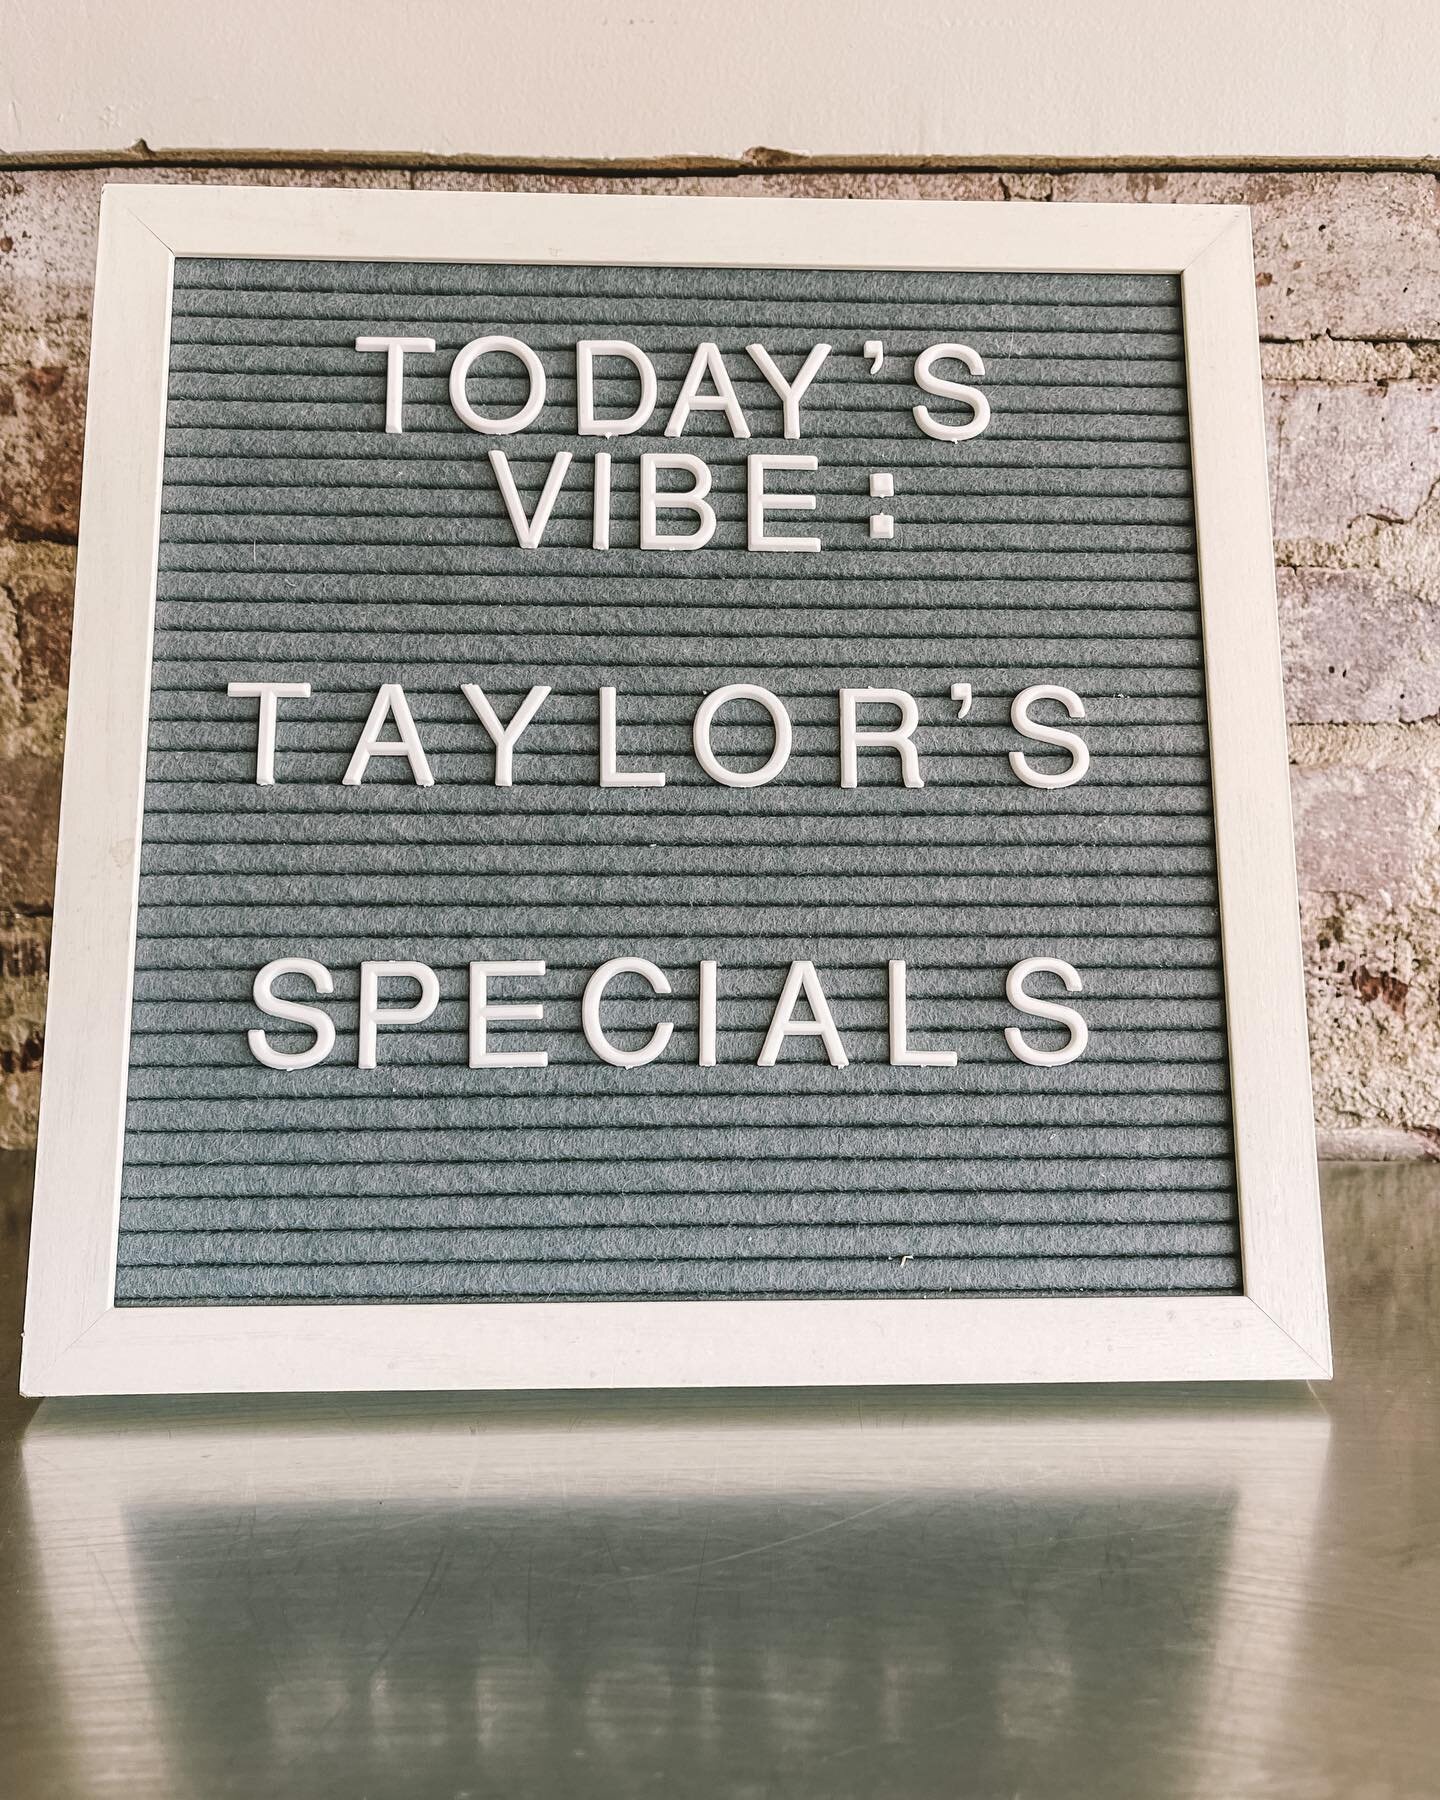 Are you as excited as we are for Friday?!?!?! Well&hellip; our girl Taylor Swift inspires us to have some special drinks 😉 Stay tuned to hear what they are!!! 

#taylorswift #midnights #likewise #likewisecoffee #likewiseroastery #coffee #shoplocal #